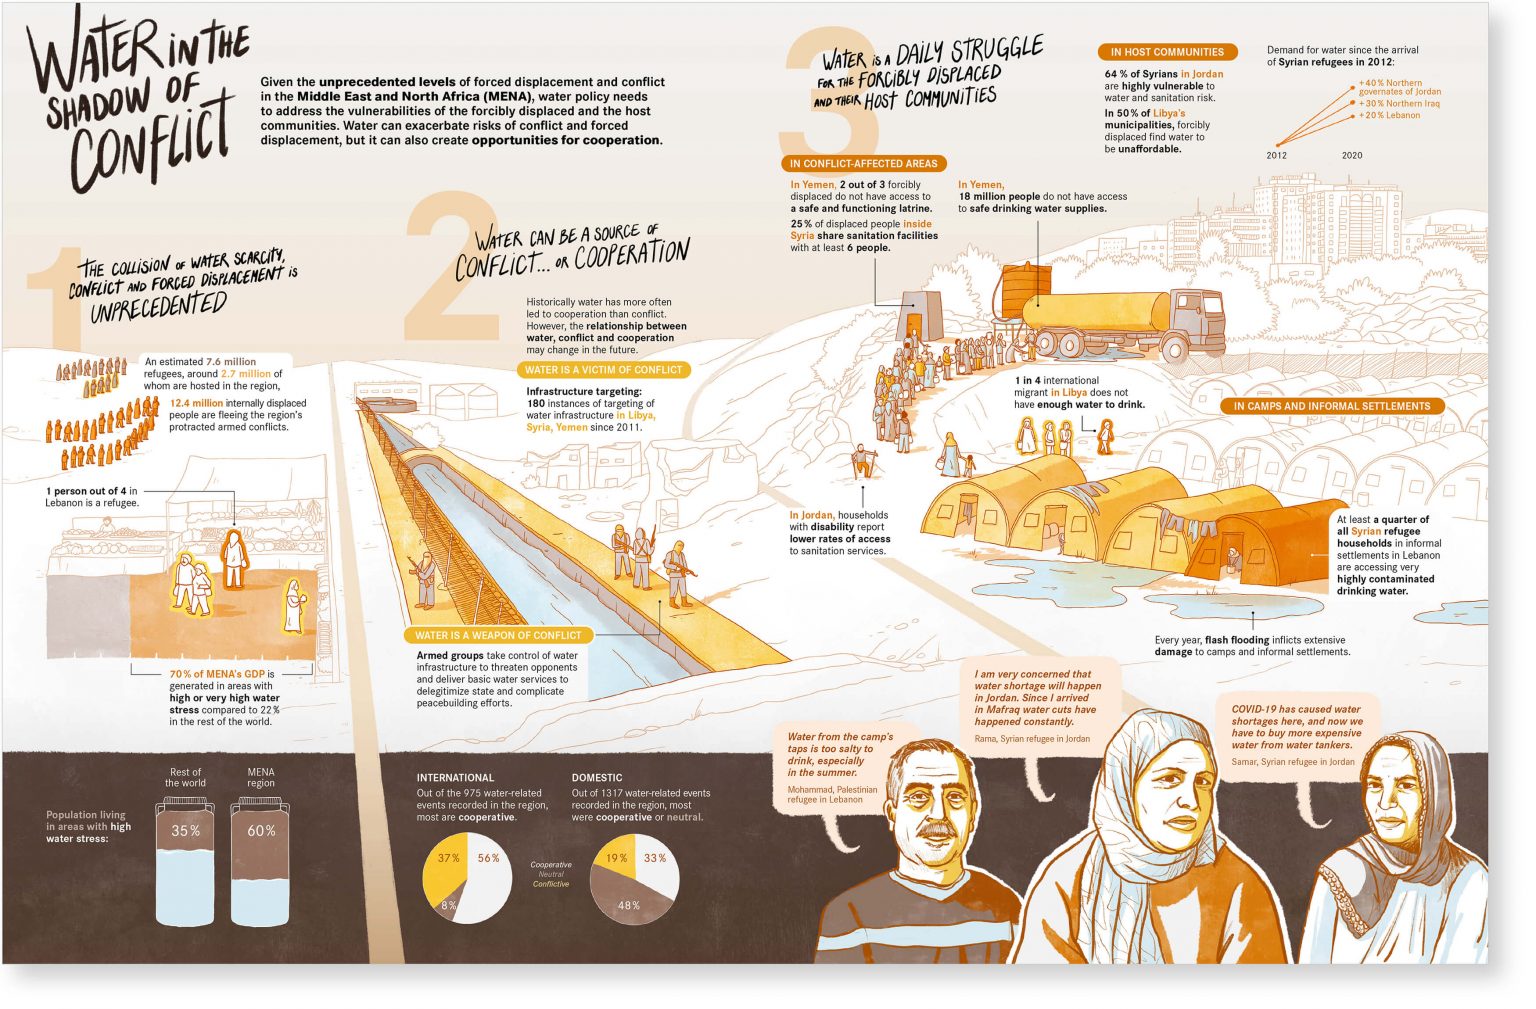 Infographic composed of texts, an illustration, graphs and portraits